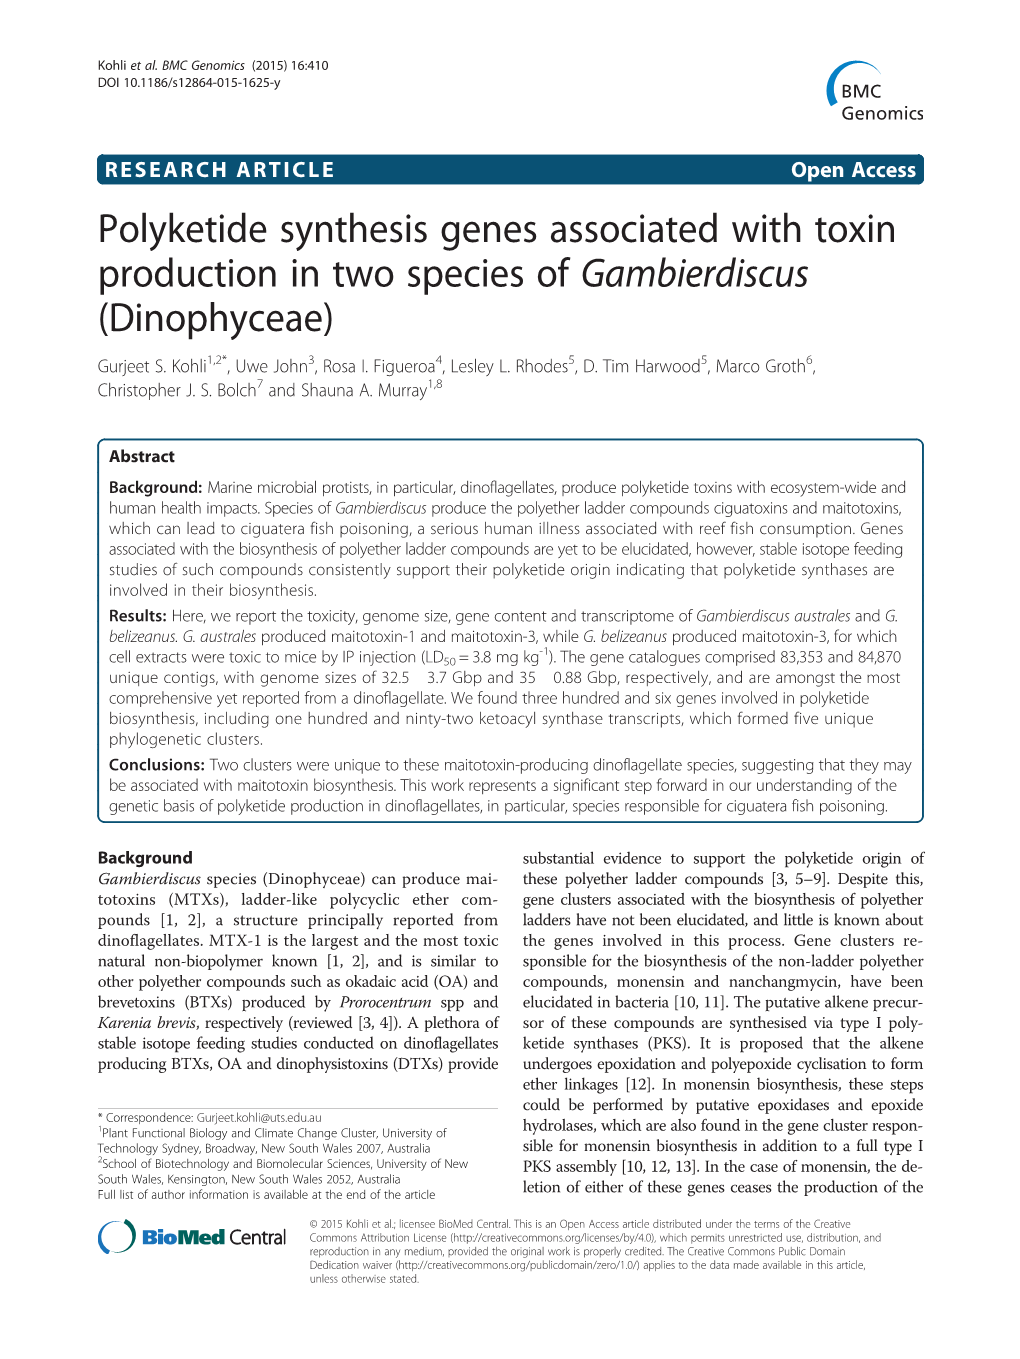 Polyketide Synthesis Genes Associated with Toxin Production in Two Species of Gambierdiscus (Dinophyceae) Gurjeet S